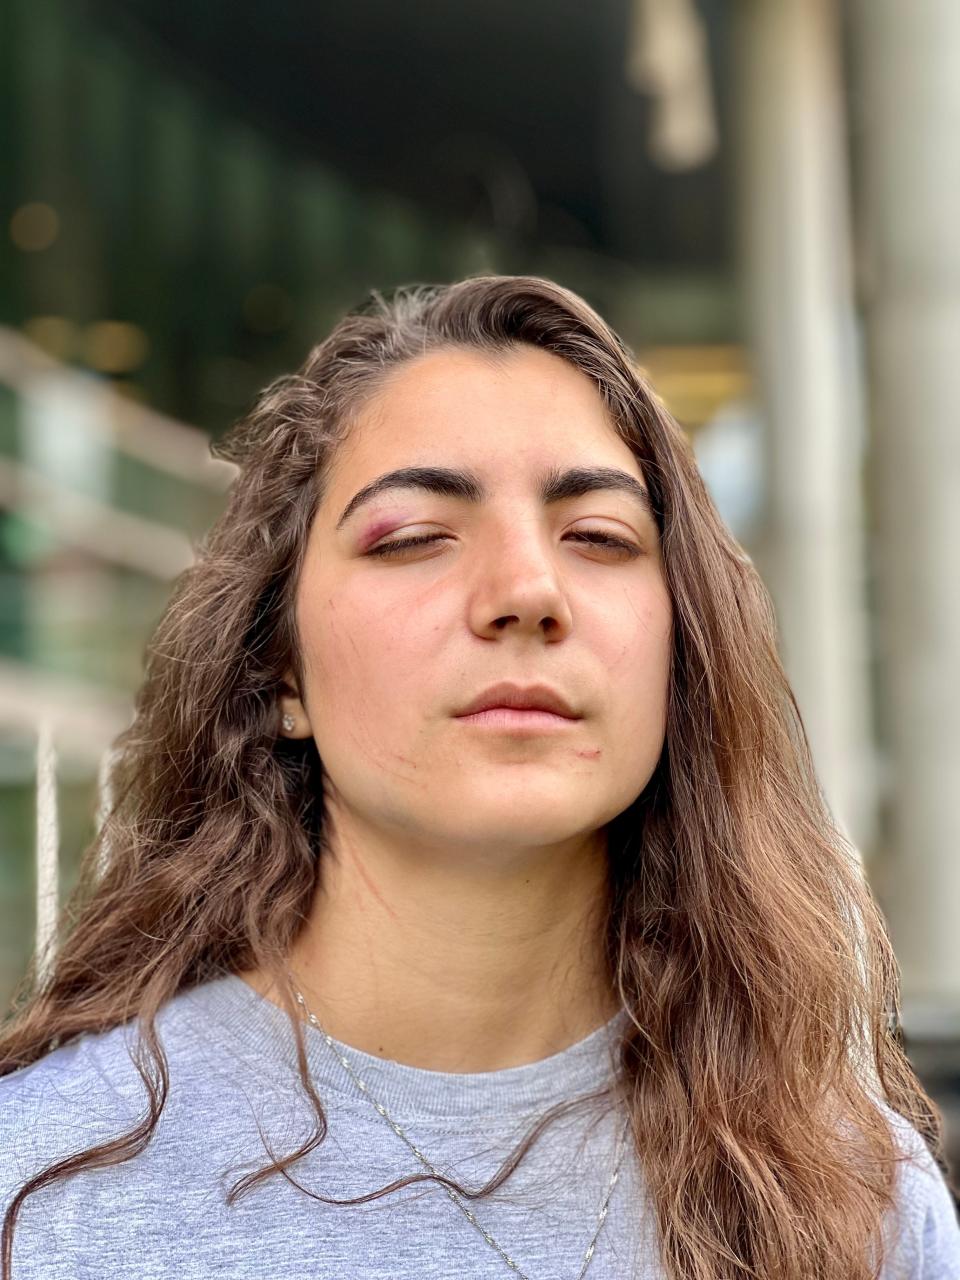 Sereen Haddad, a student at Virginia Commonwealth University, and an organizer of Monday's demonstration lambasted the university's response to the peaceful protest and the use of force by police that followed.